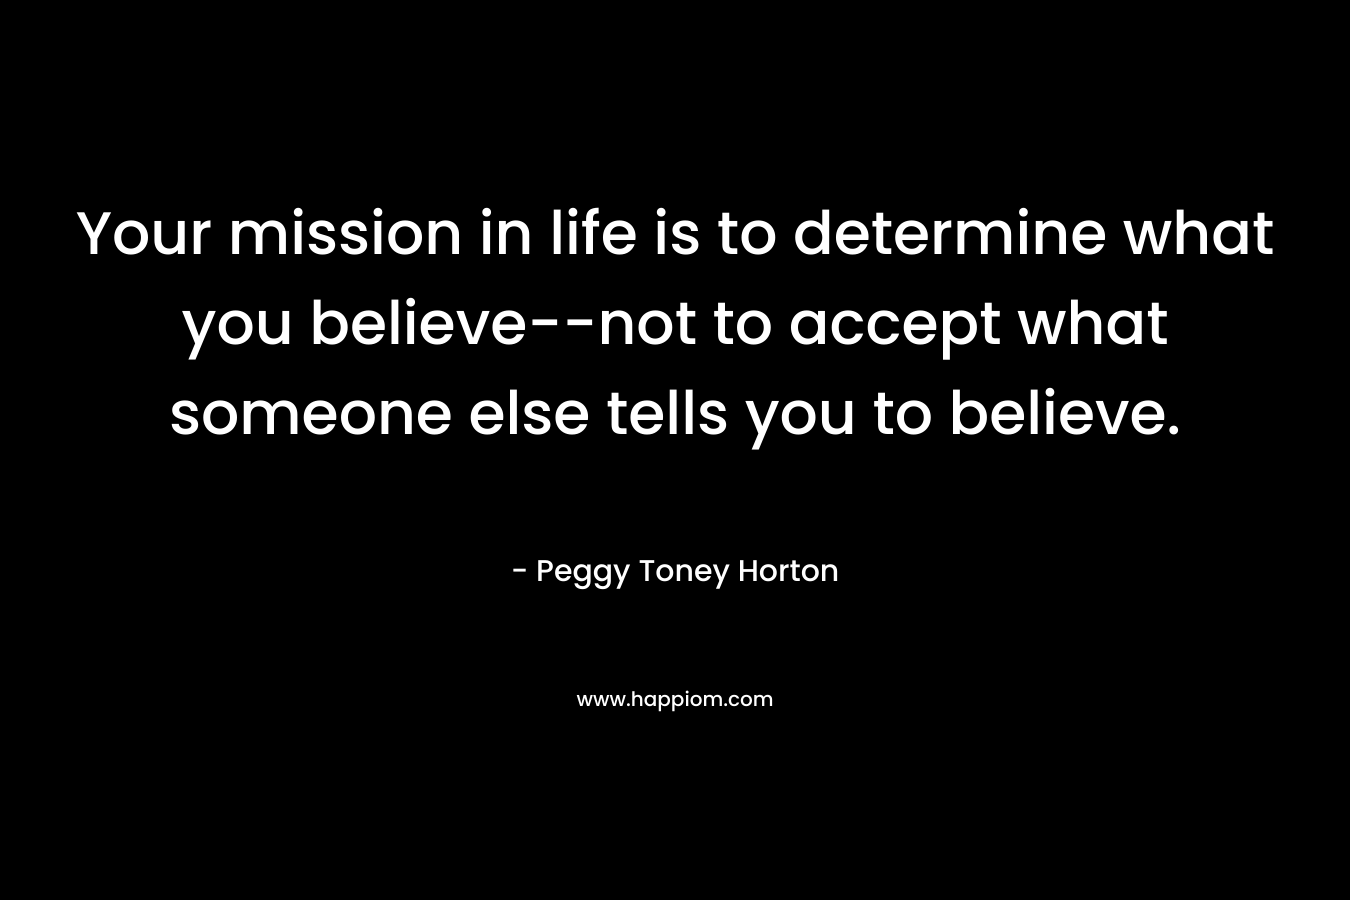 Your mission in life is to determine what you believe--not to accept what someone else tells you to believe.